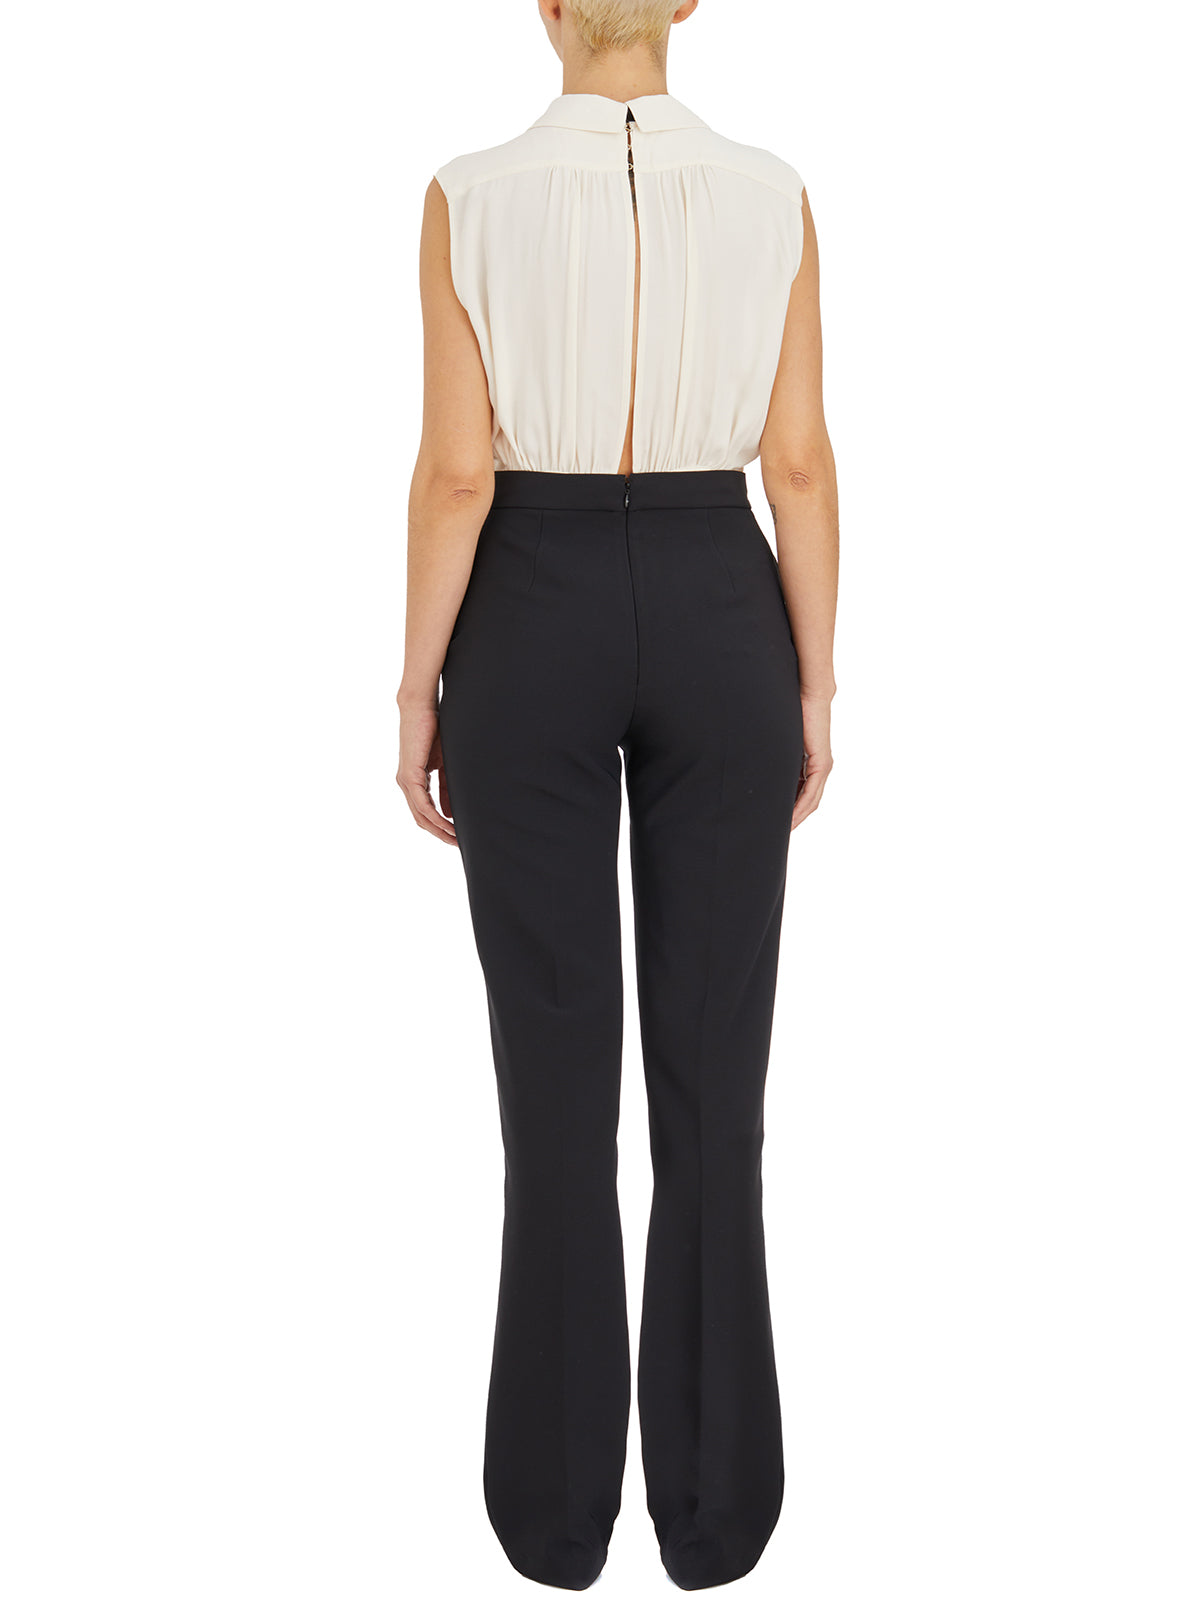 Elegant and Chic Jumpsuit - Black and White